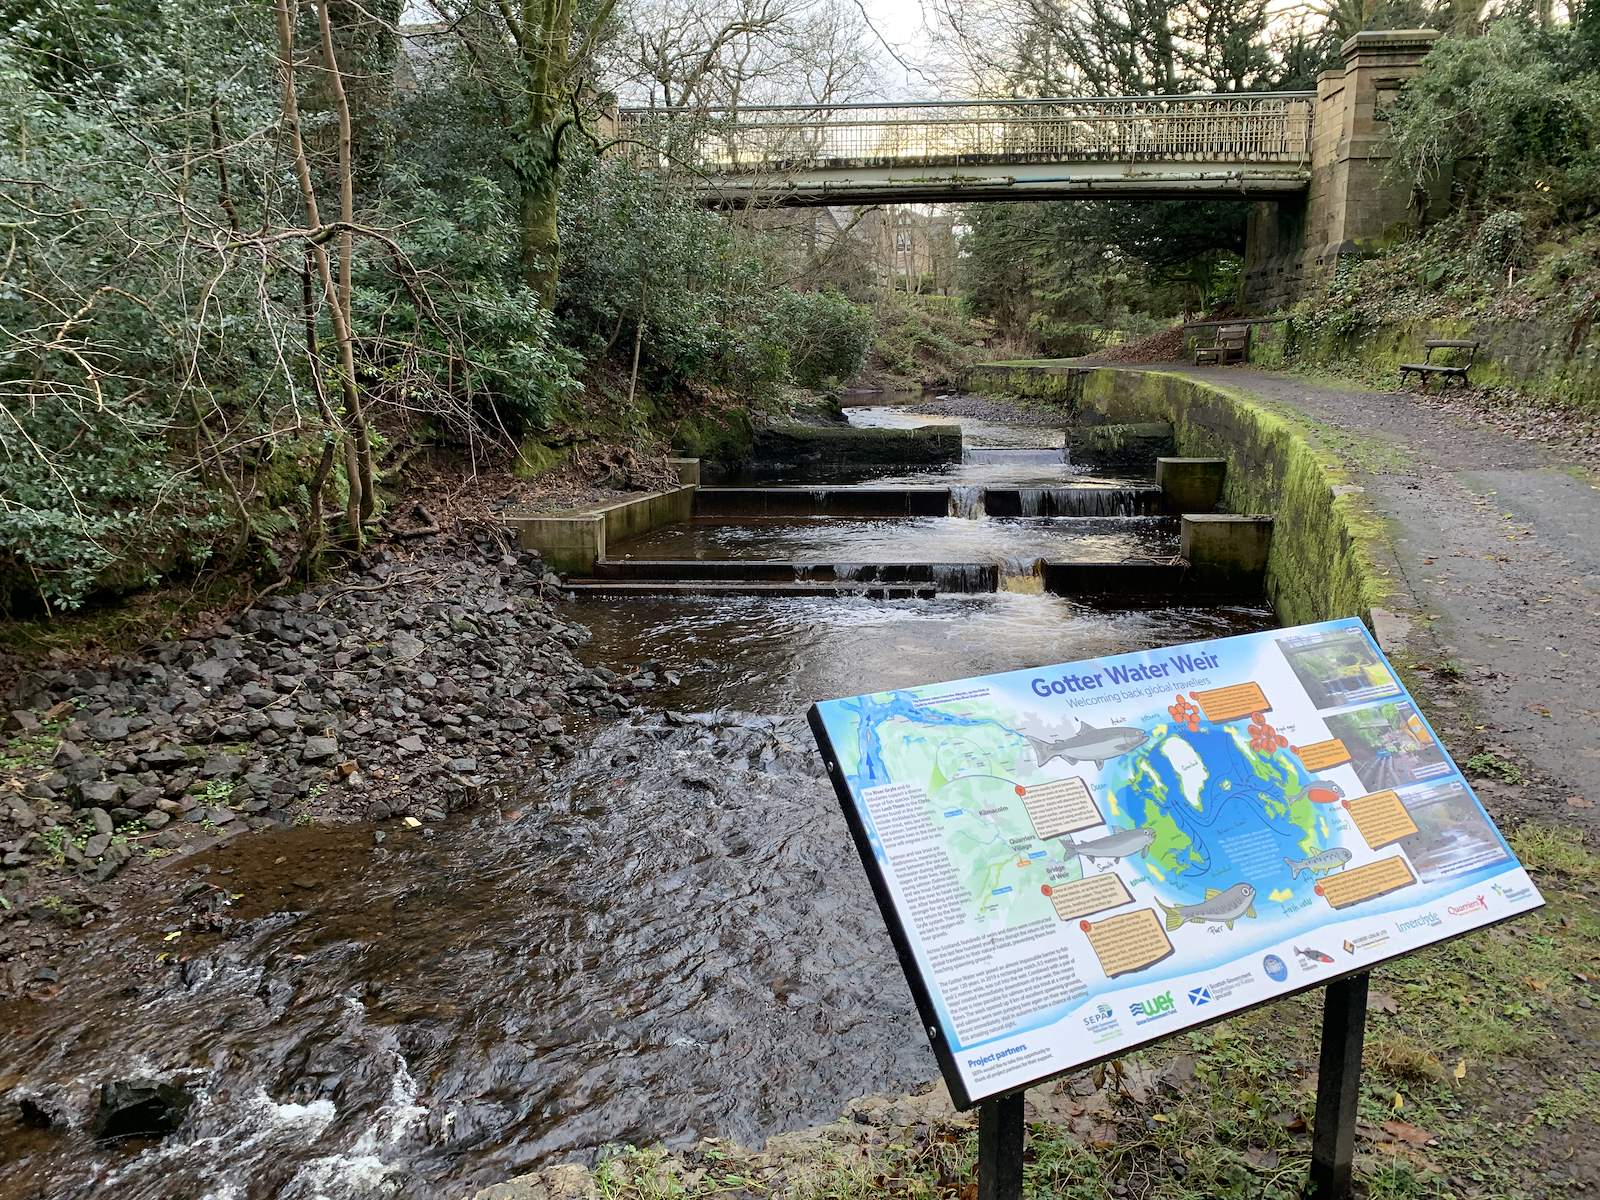 The water weir project at Gotter, Scotland